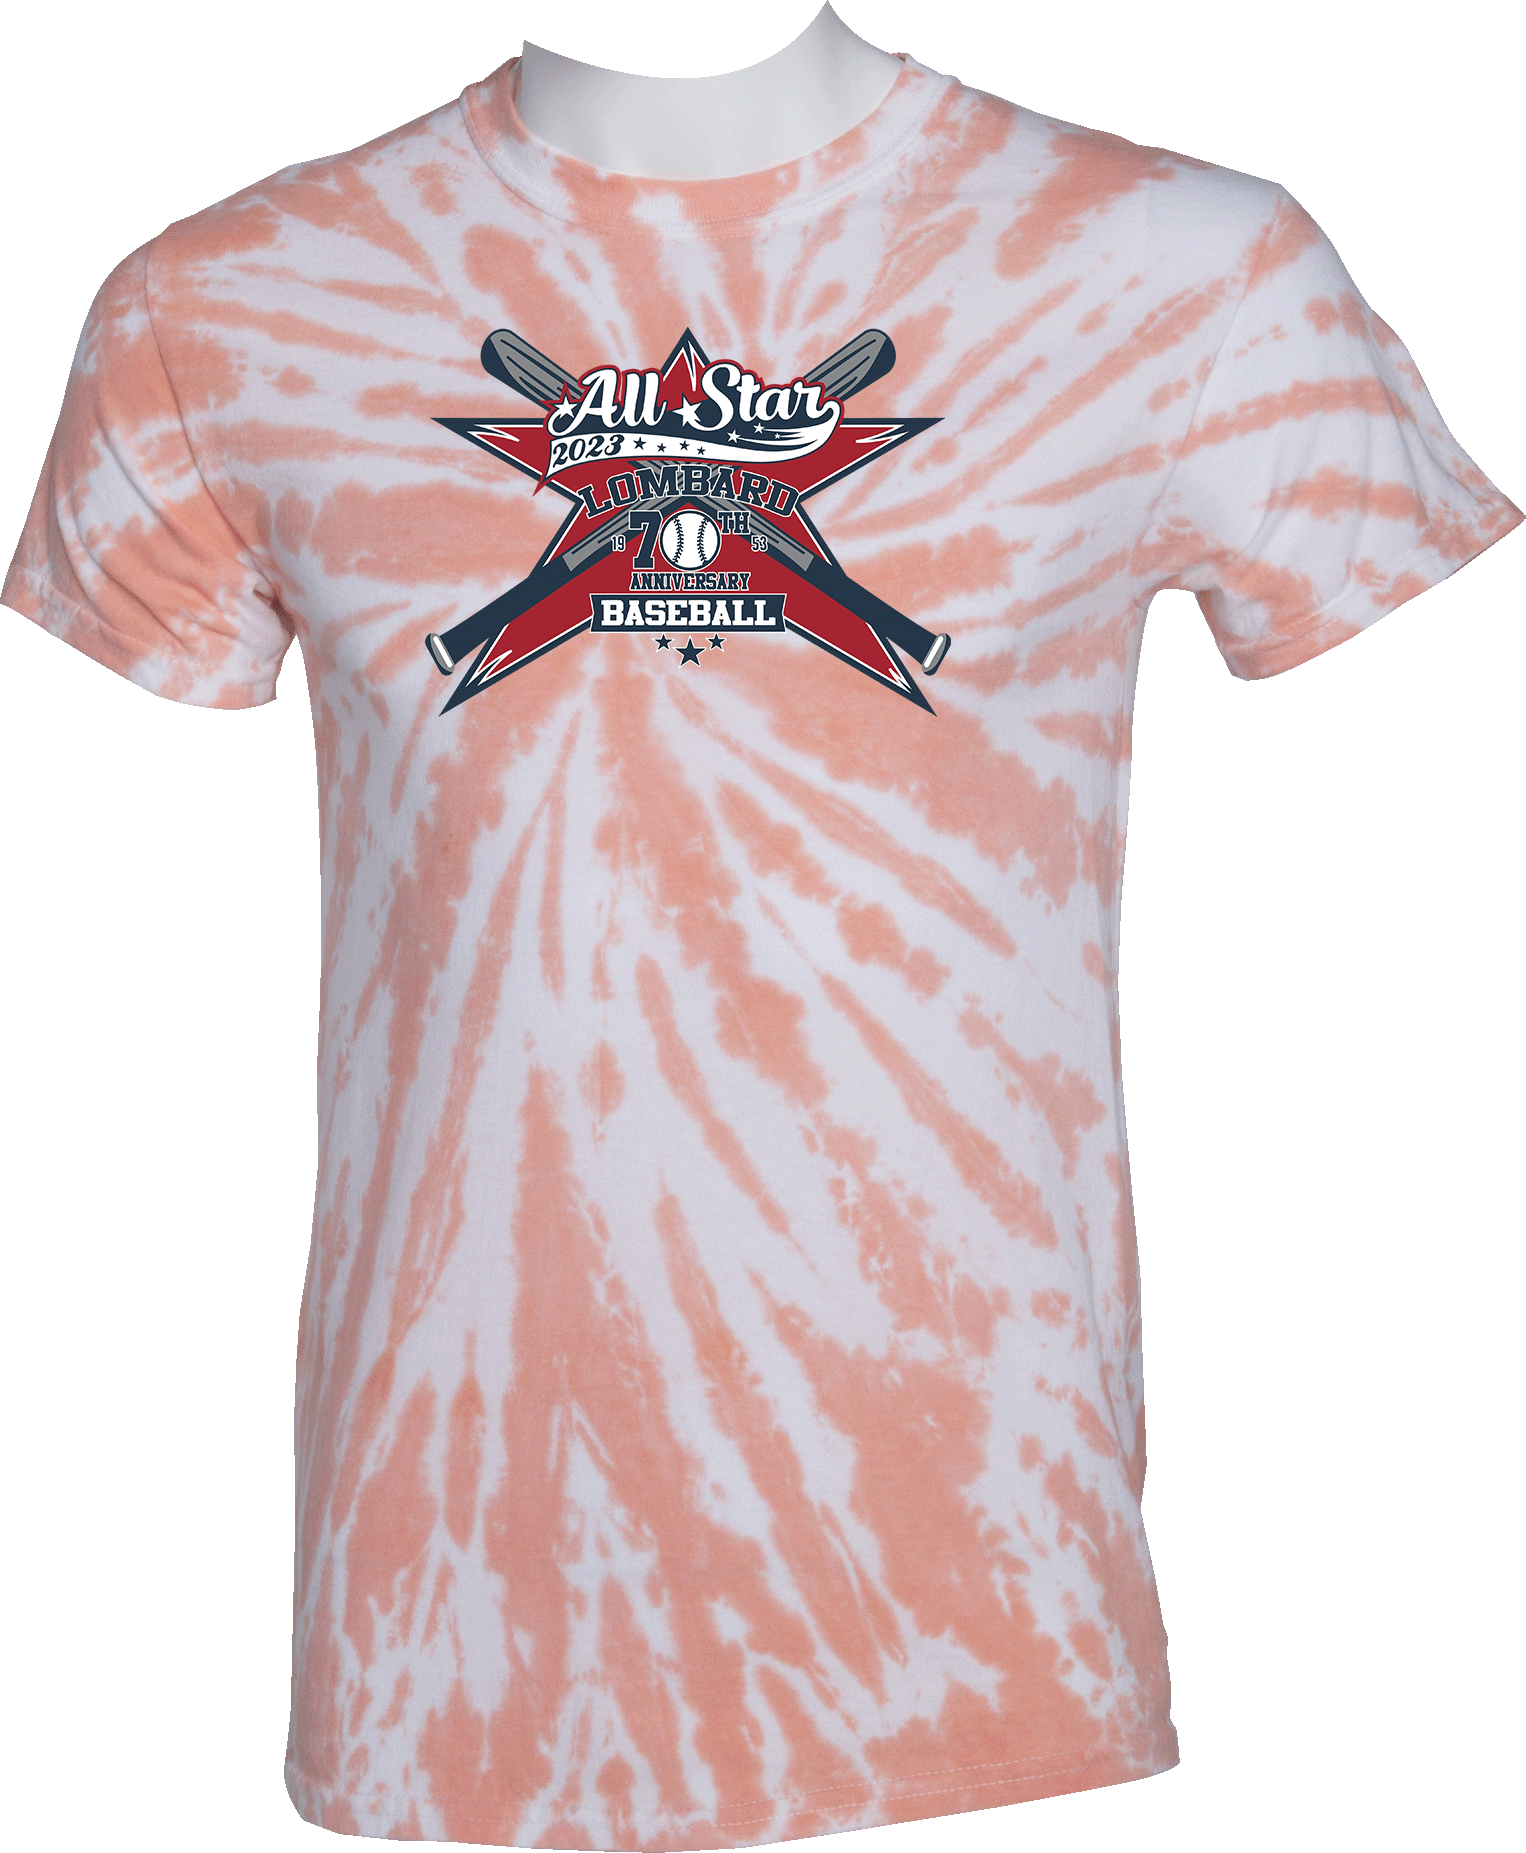 TIE-DYE SHORT SLEEVES - 2023 Lombard Baseball League's 70th Anniversary All Star Event